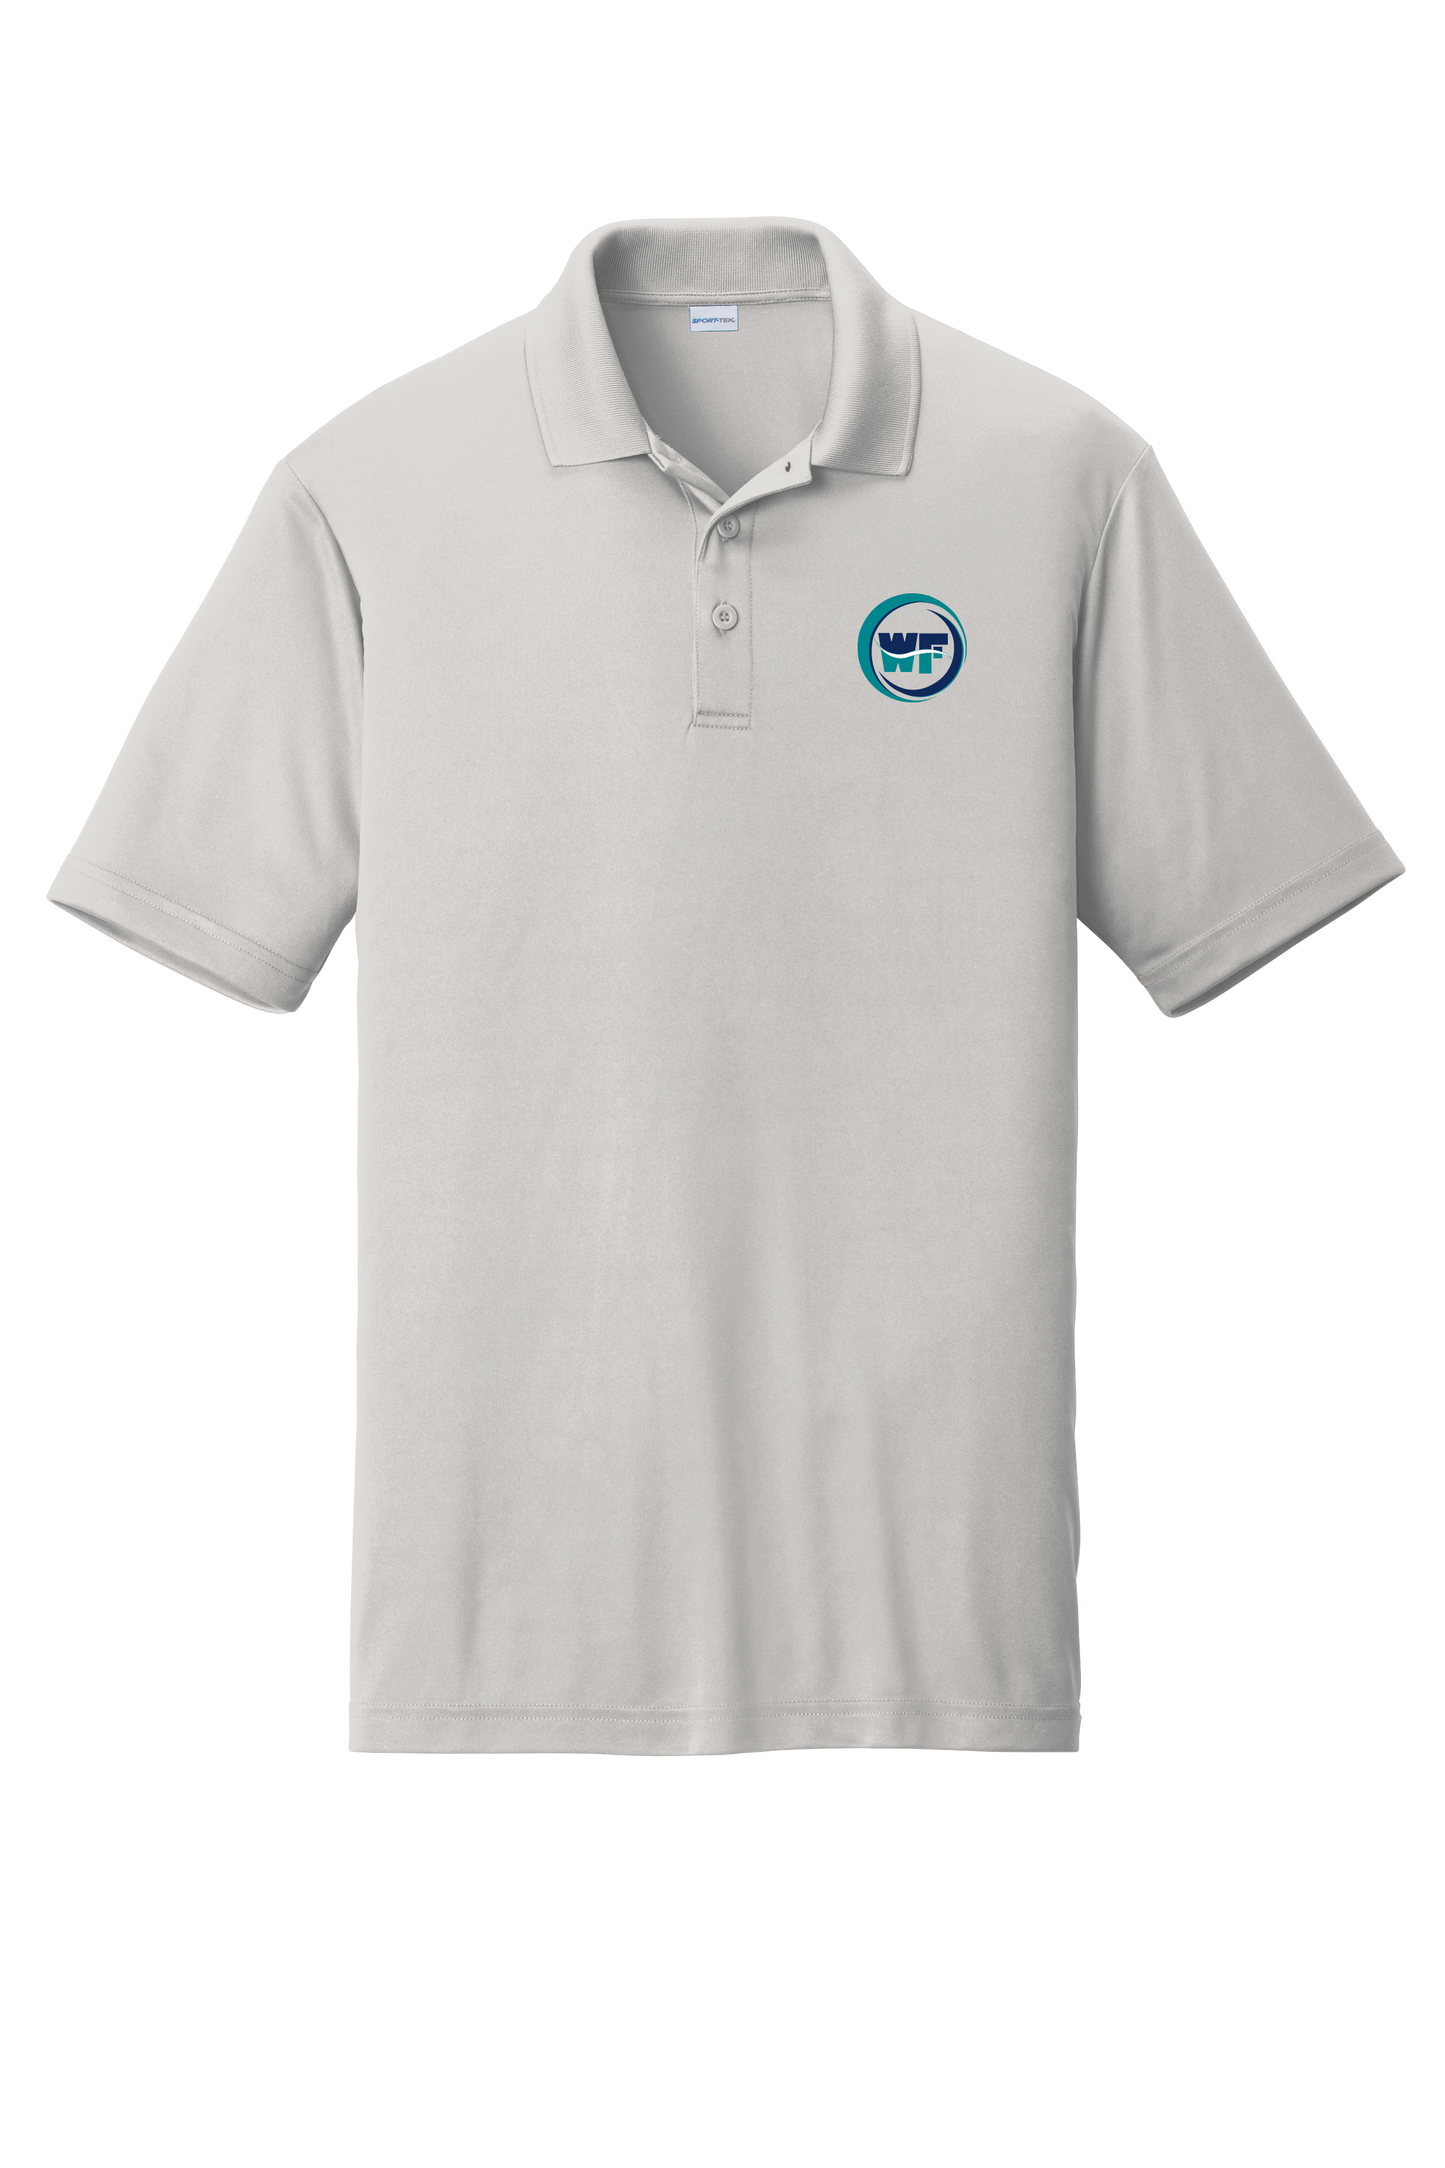 WF Waves Dry Fit Polo